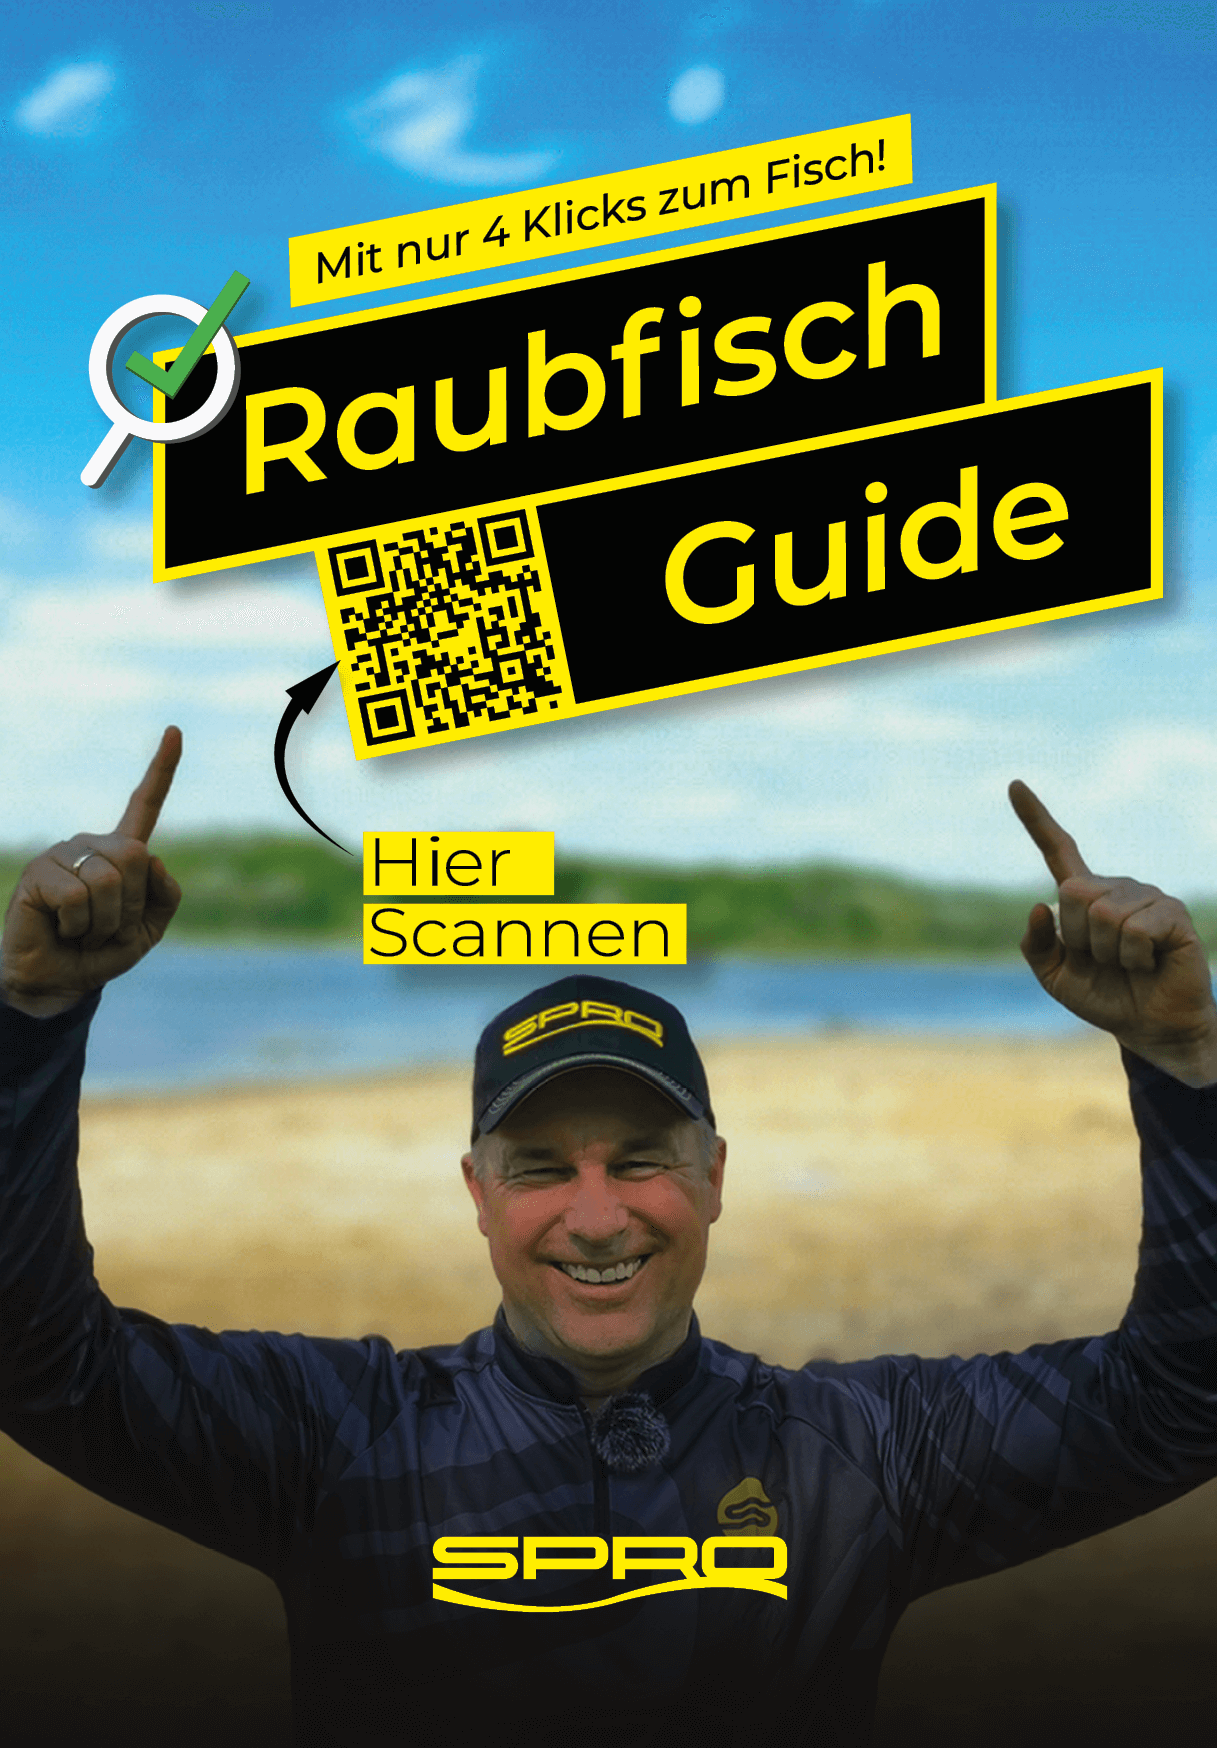 Blog_Images_Raubfisch_Guide_02